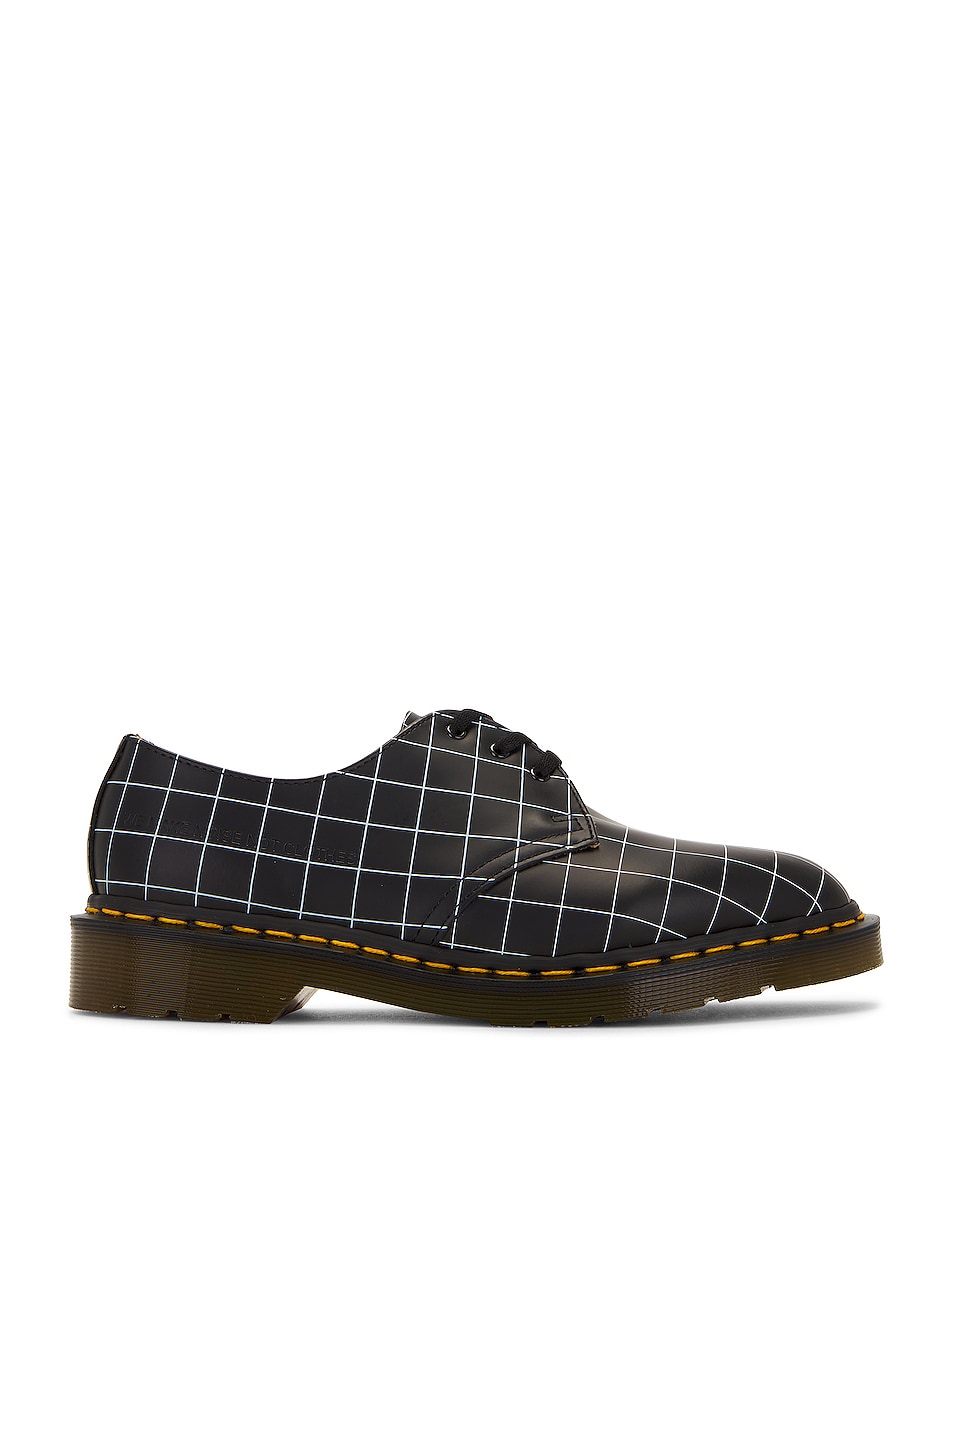 Image 1 of Dr. Martens x Undercover 1461 Check Smooth in Black